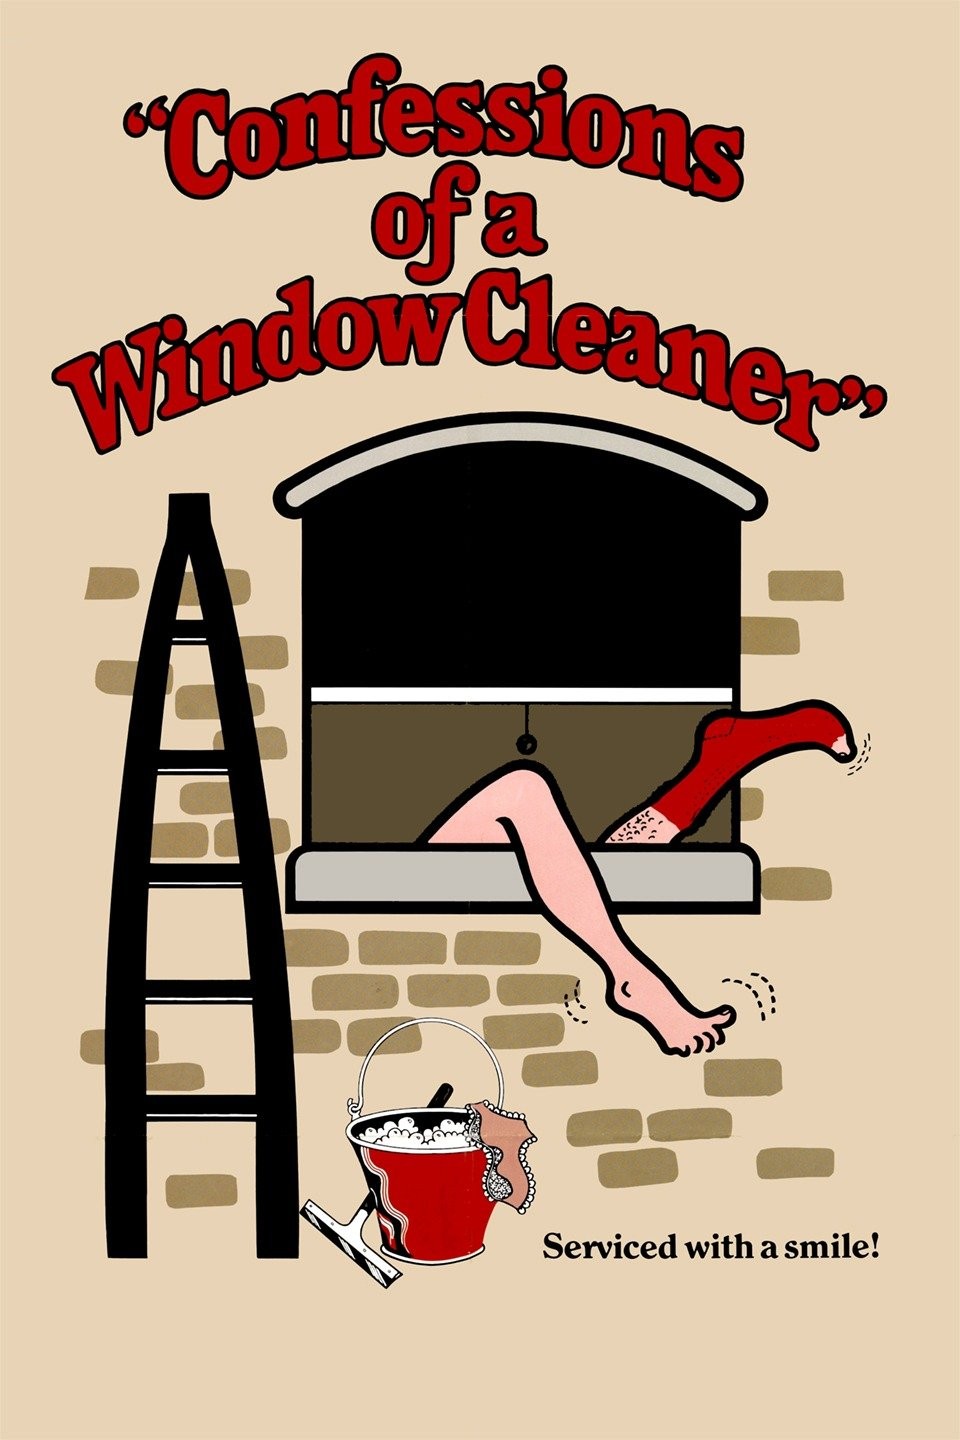 Confessions of a window washer